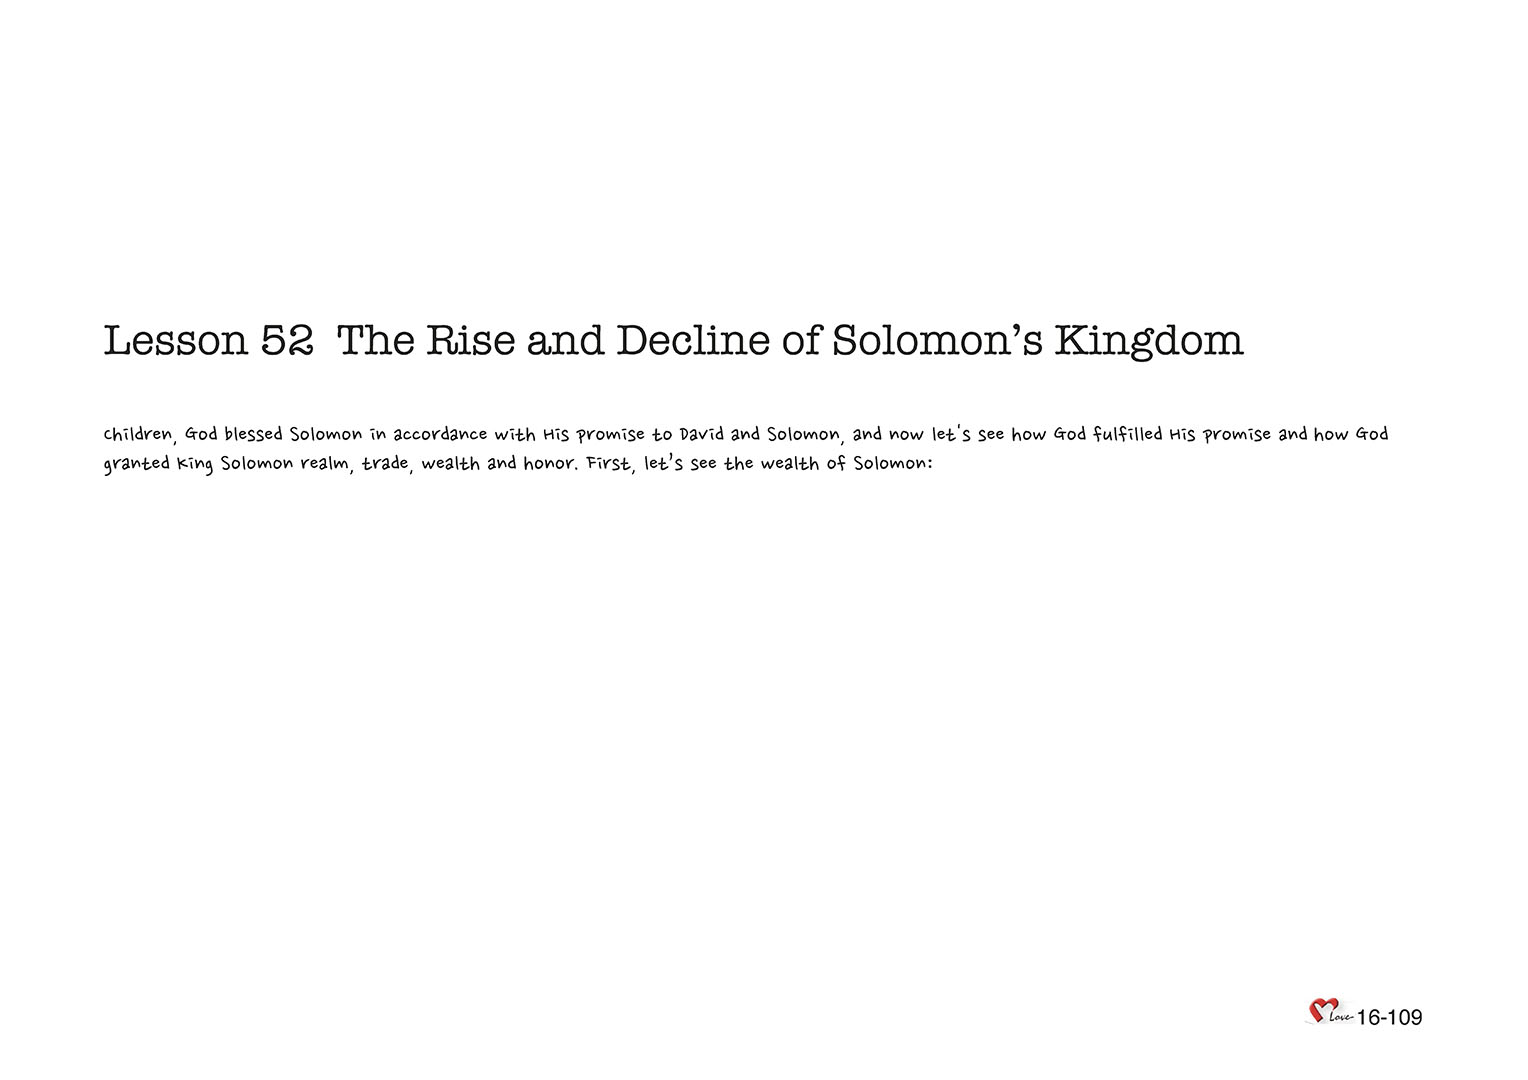 Chapter 16 - Lesson 52 - The Rise and Decline of Solomon’s Kingdom